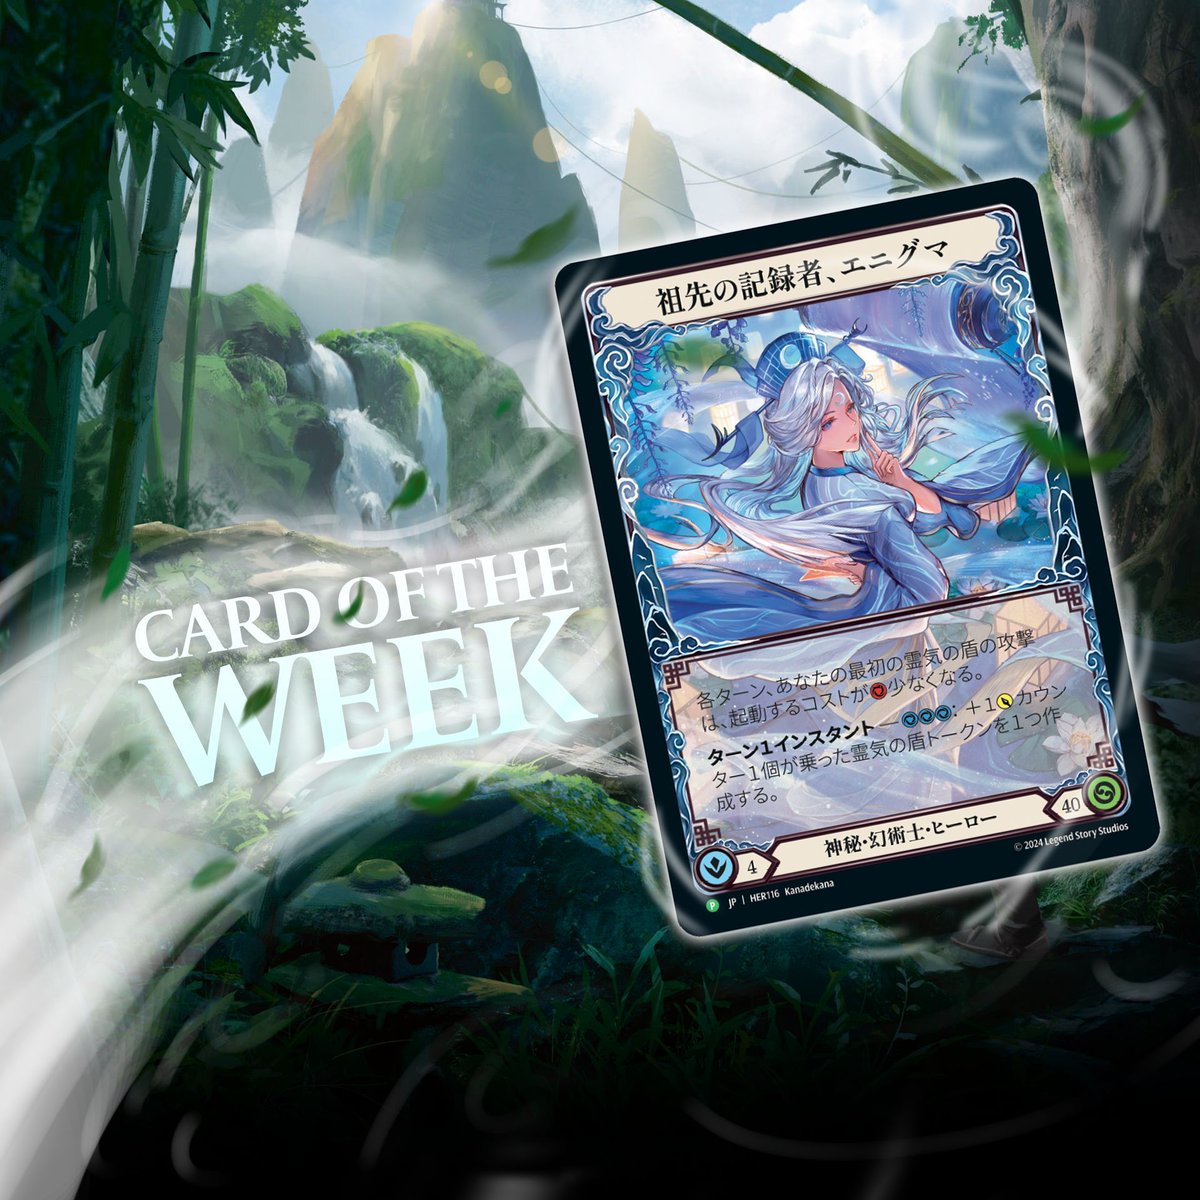 Card of the Week: Enigma, Ledger of Ancestry Did you find the Anime Alternate Art at the World Premiere of Part the Mistveil? #fabtcg